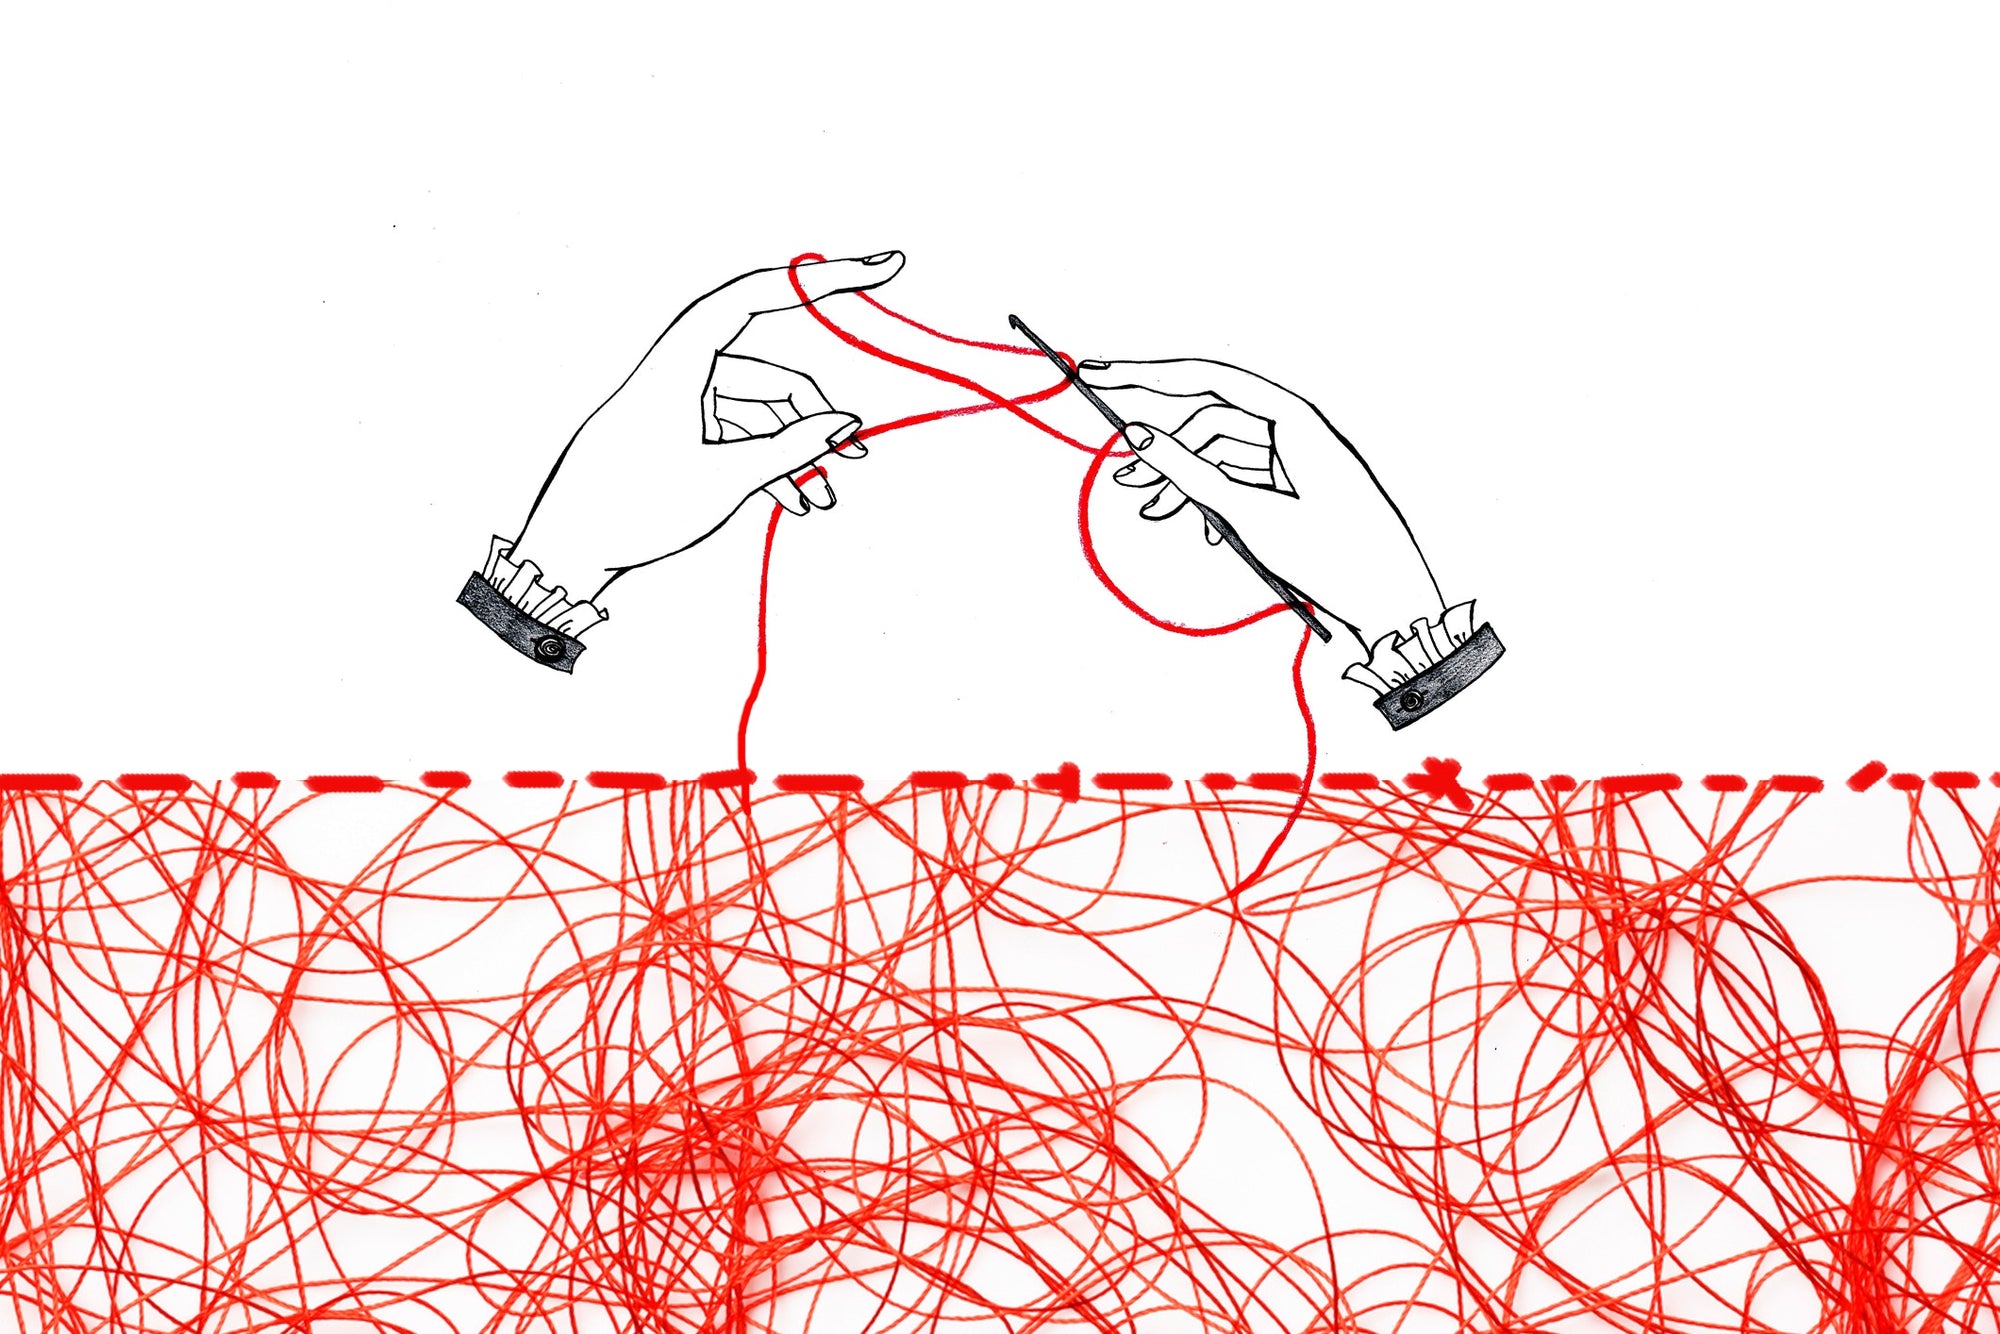 Drawing of hands doing knitting